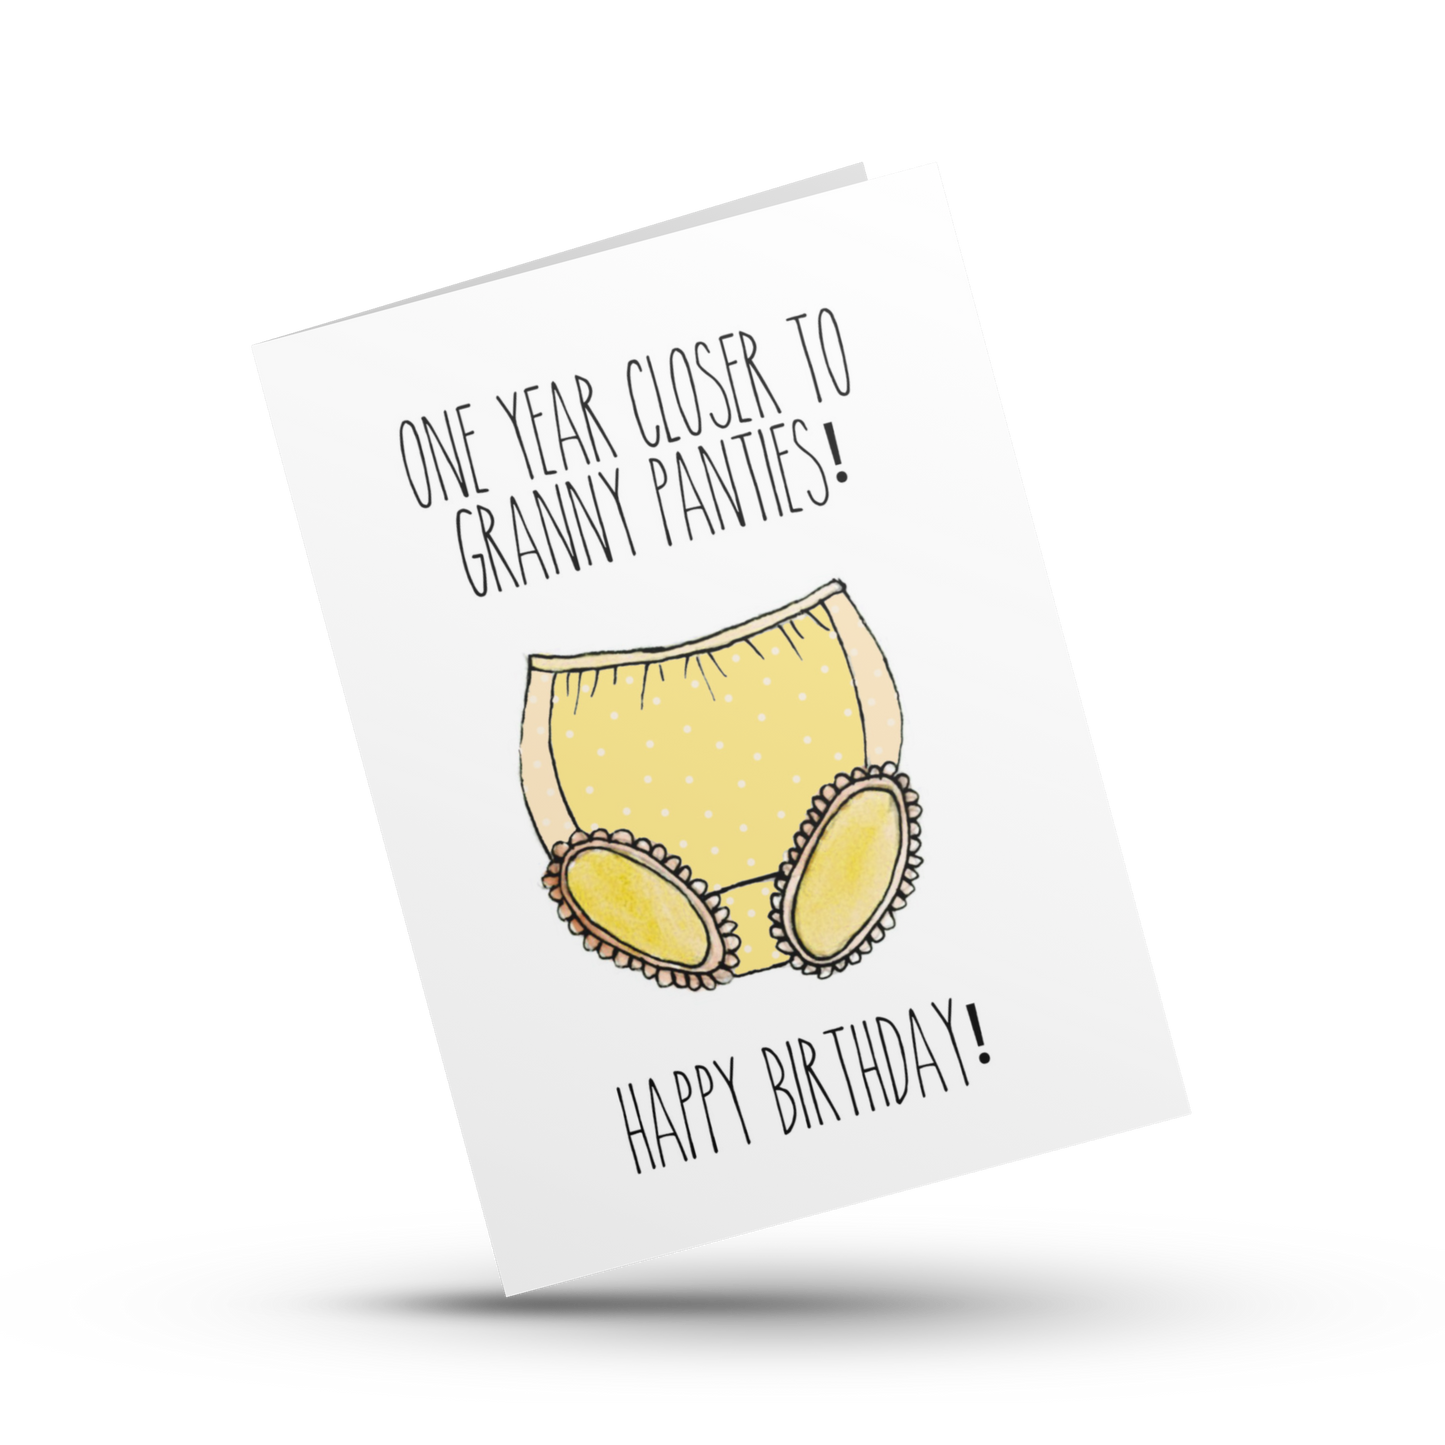 One year closer to granny panties, Funny birthday card, Birthday card for best friend, Old lady card, Birthday Humor, Old age joke card